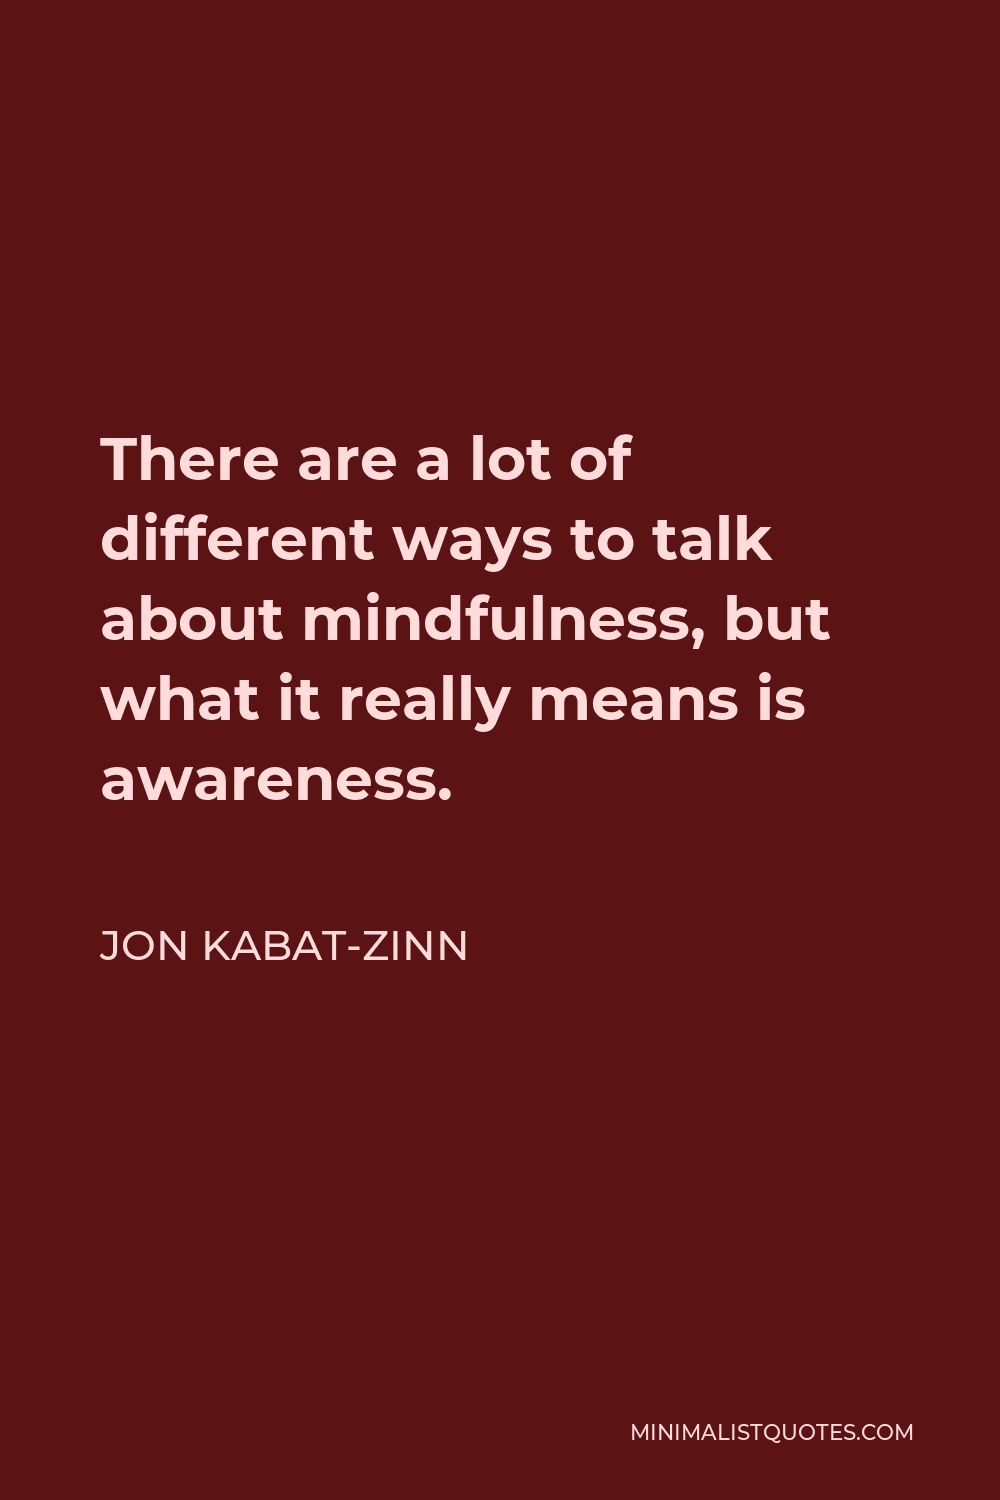 Jon Kabat-Zinn Quote - There are a lot of different ways to talk about mindfulness, but what it really means is awareness.